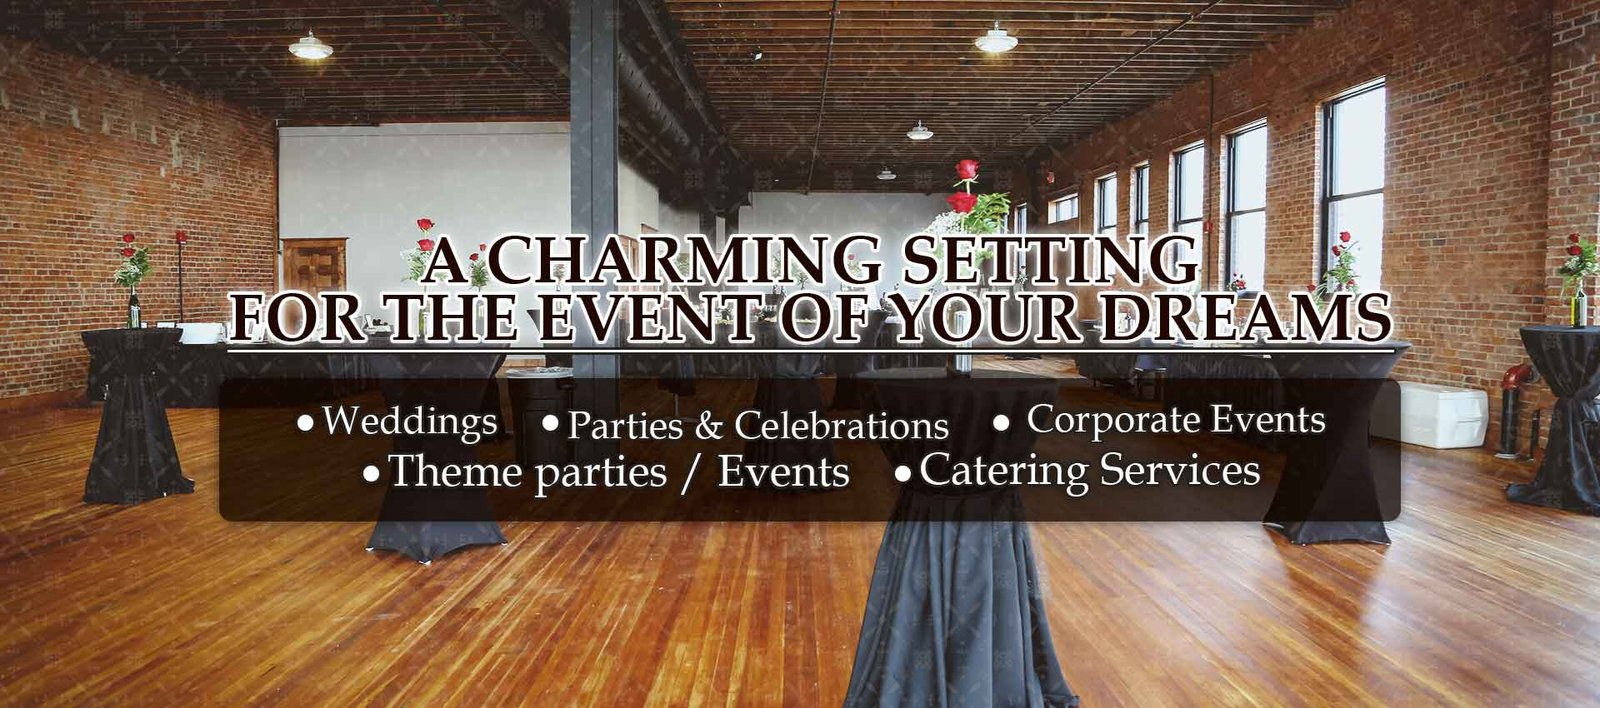 Event Venues for Birthdays in Fairbury